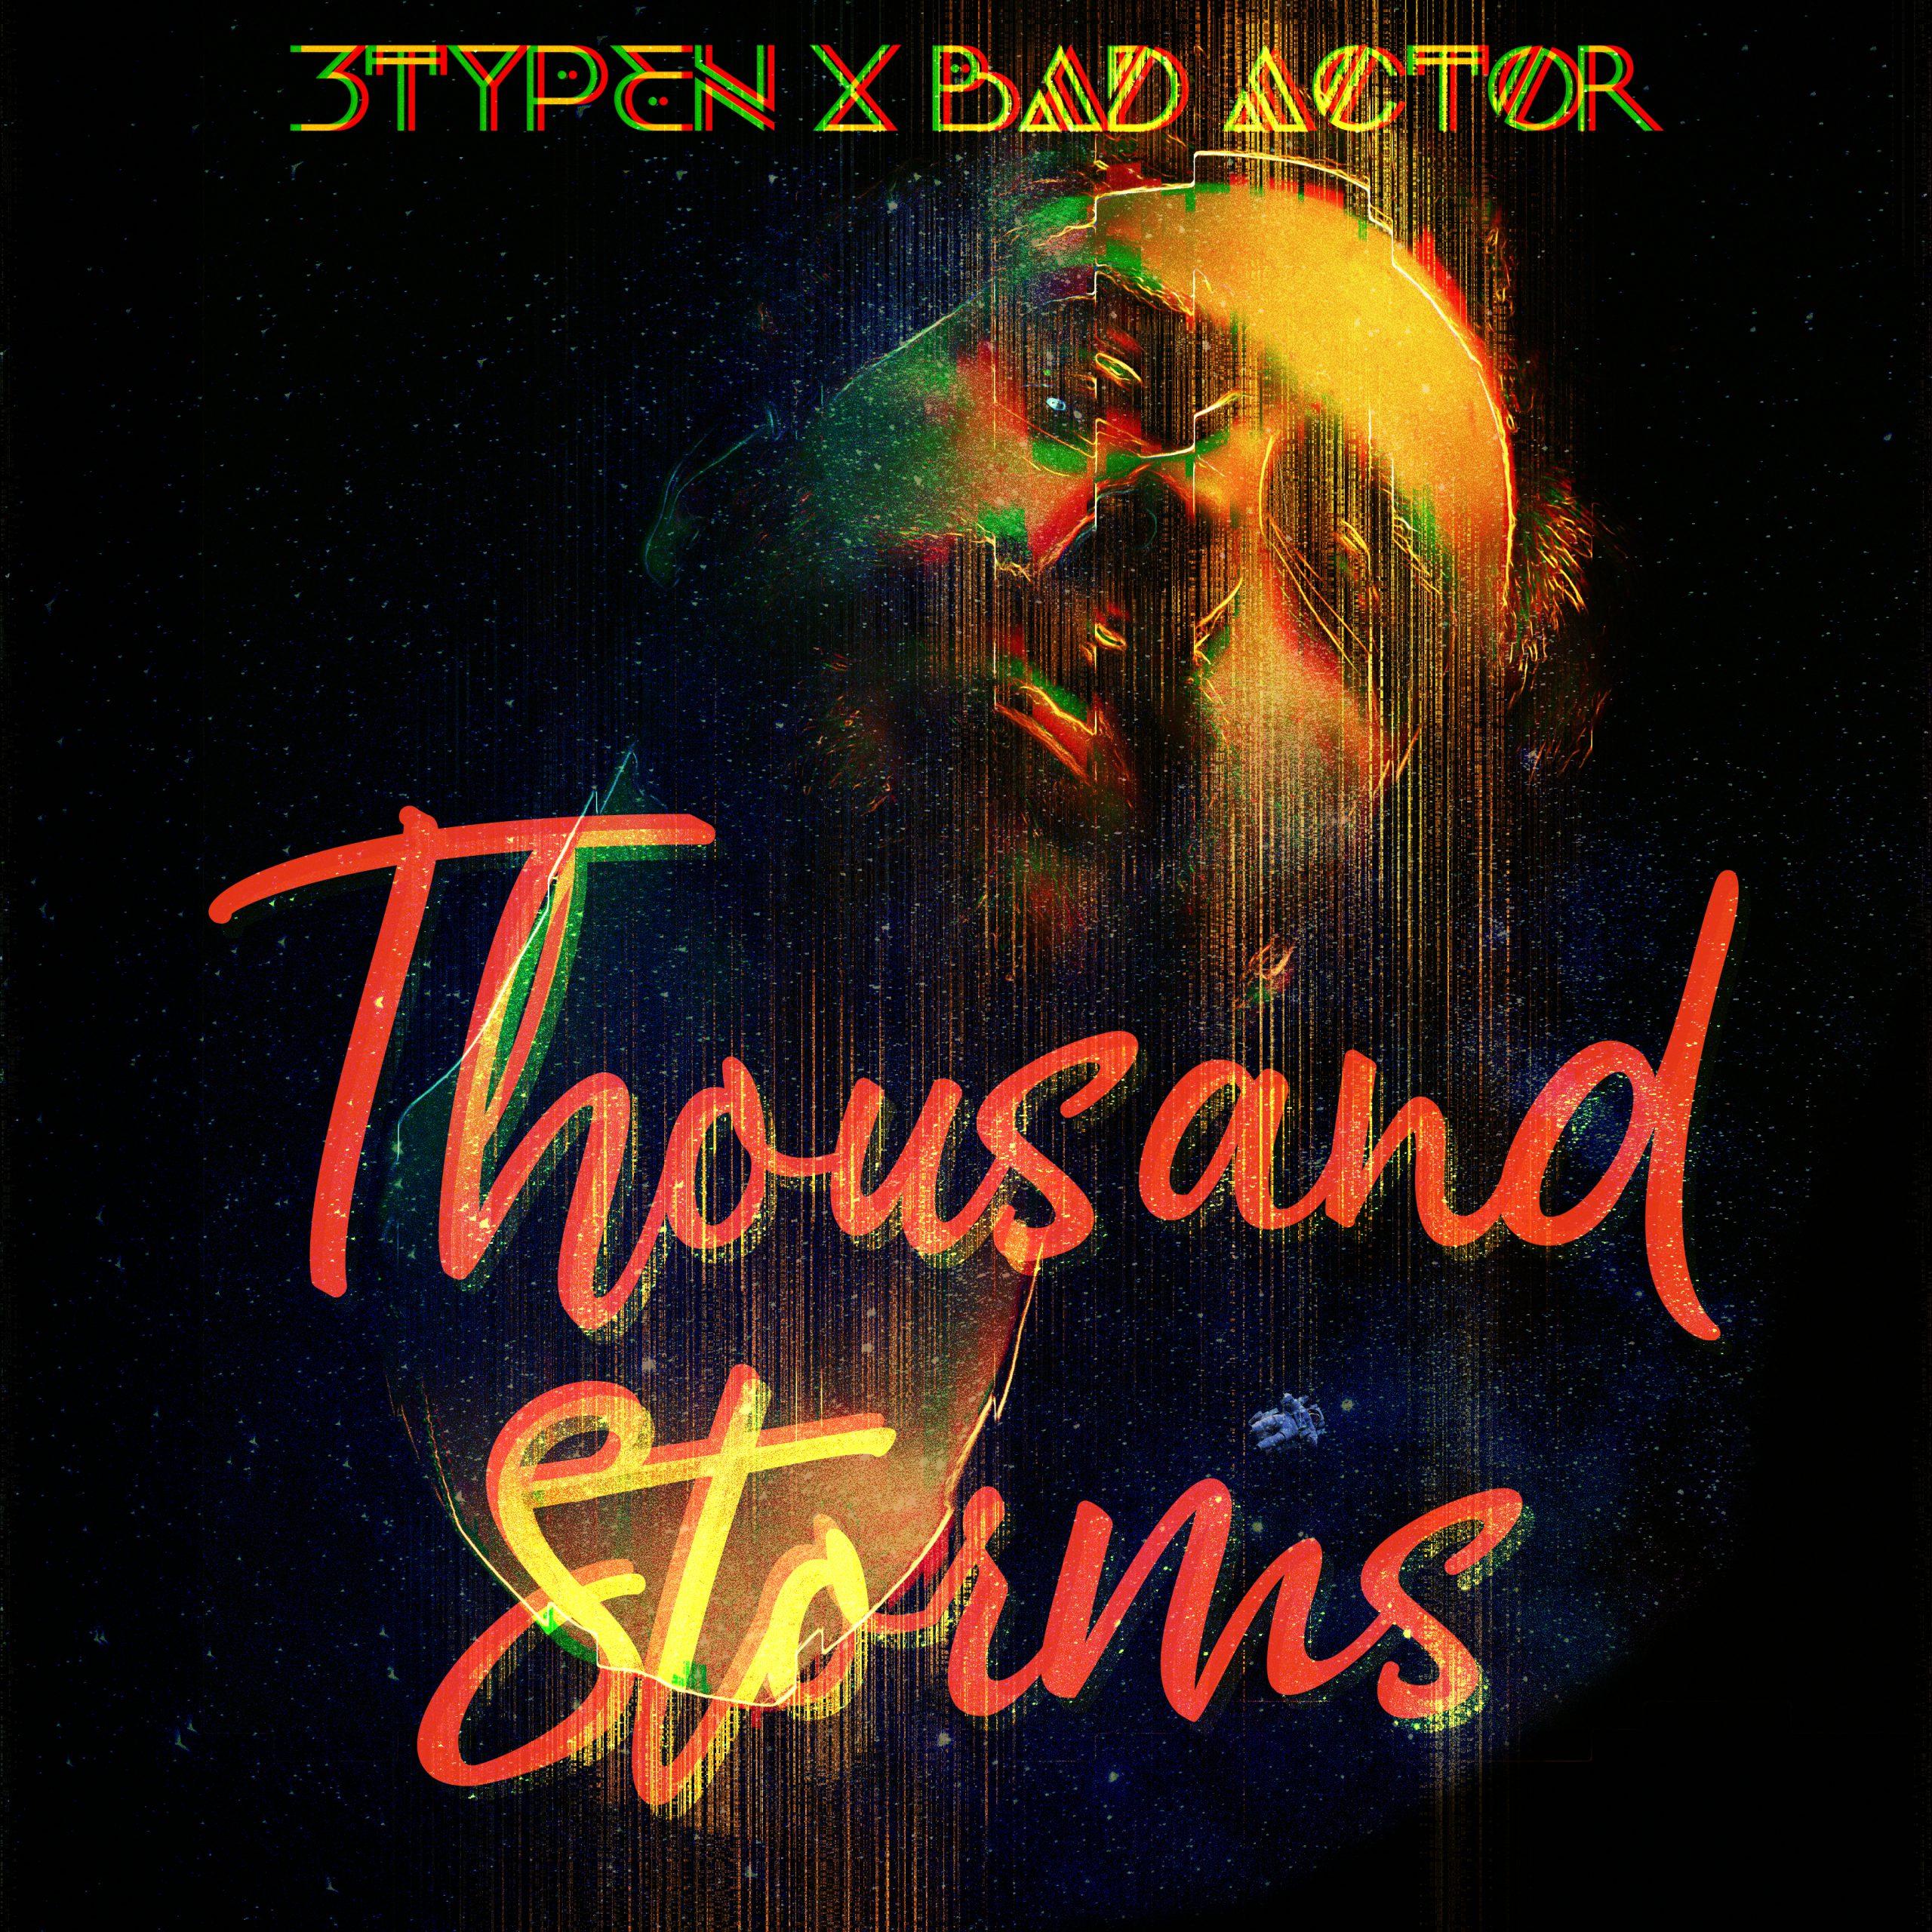 3typen x Bad Actor - Thousand Storms